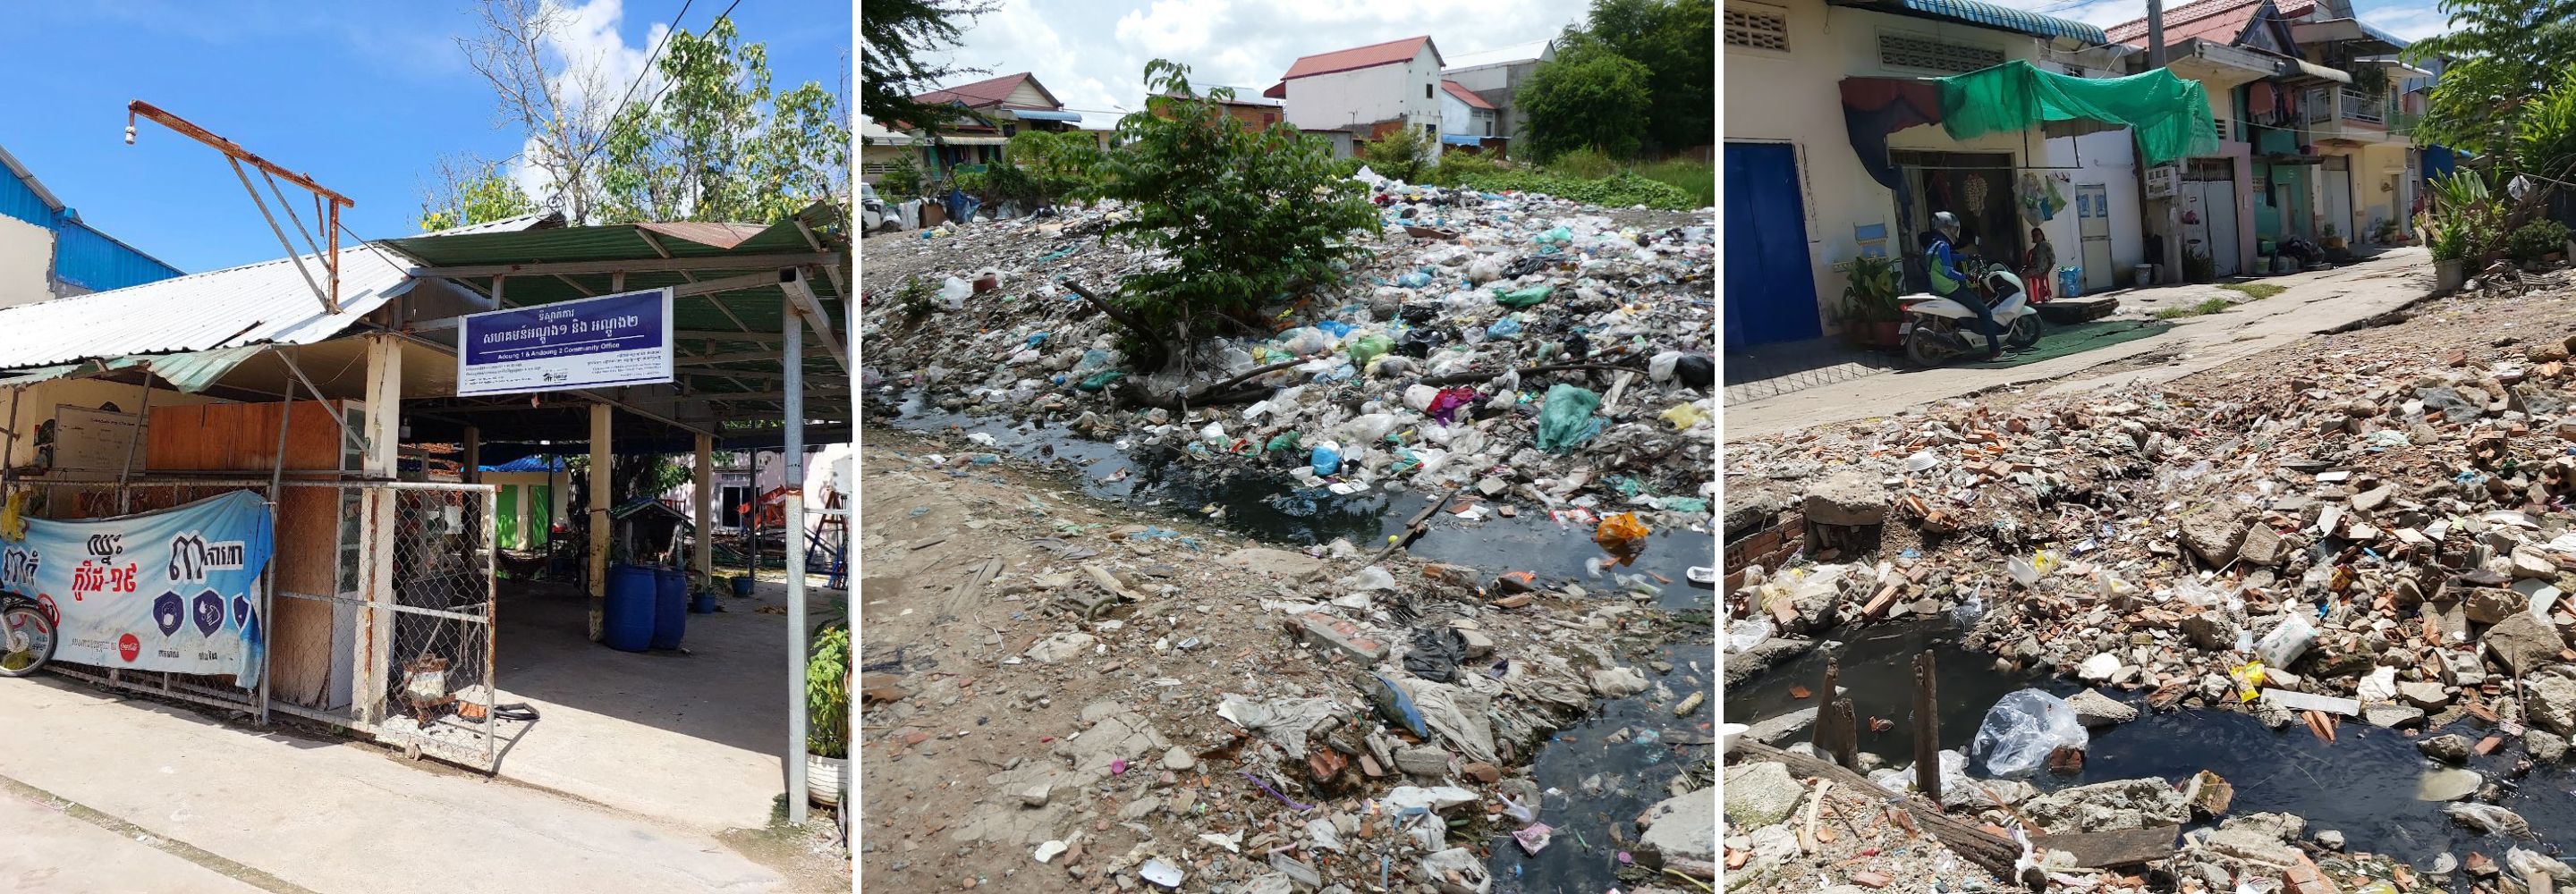 Community house, sewage and degraded road in Cambodia